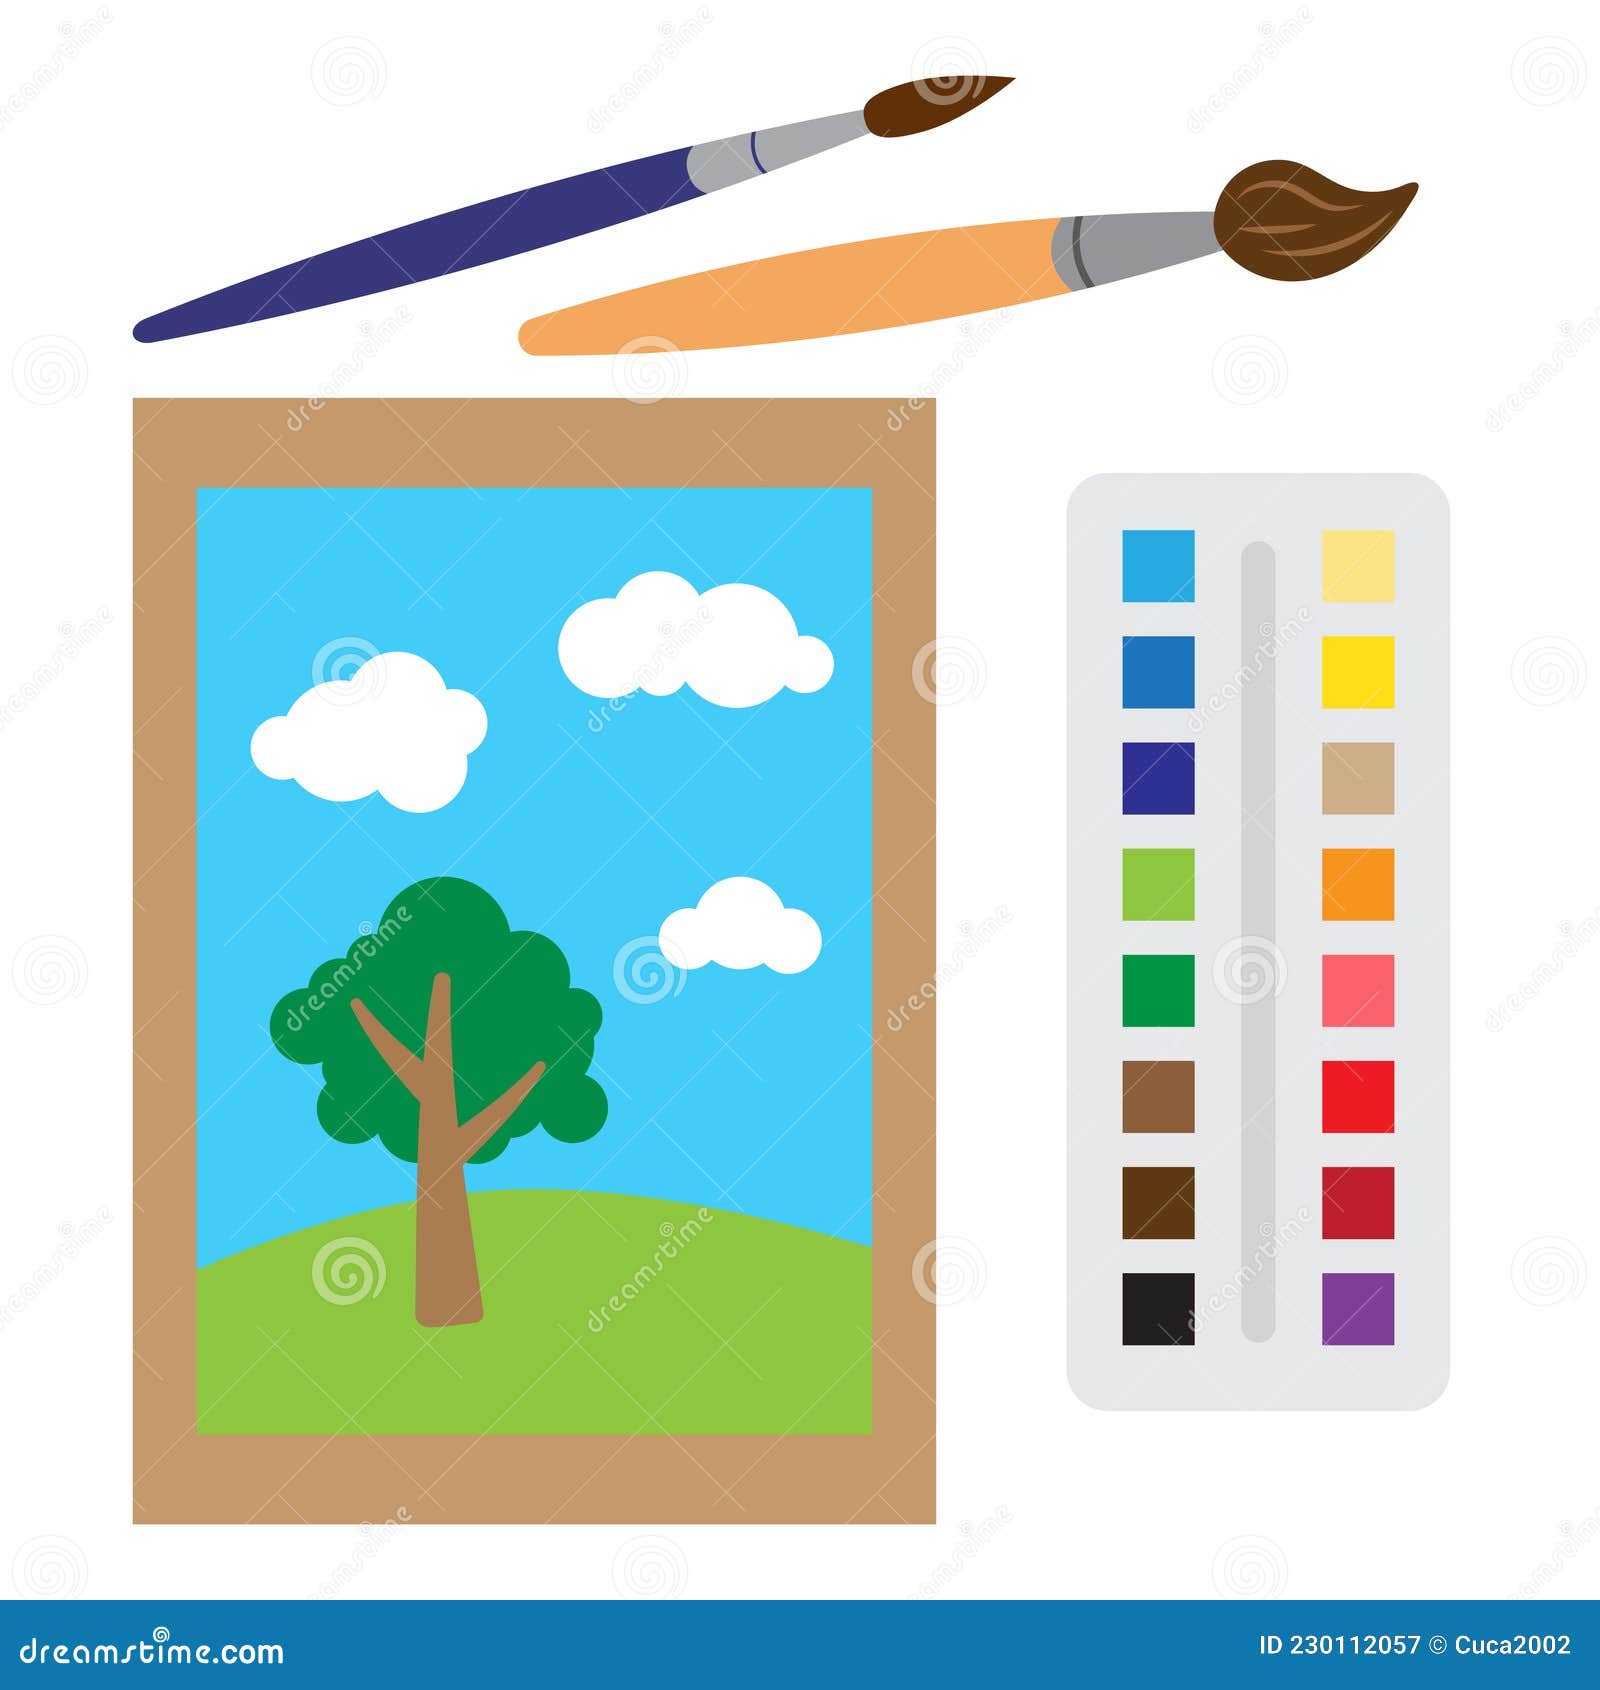 https://thumbs.dreamstime.com/z/artistic-paints-paintbrushes-painting-art-supplies-painting-drawing-vector-illustration-cartoon-flat-artistic-230112057.jpg